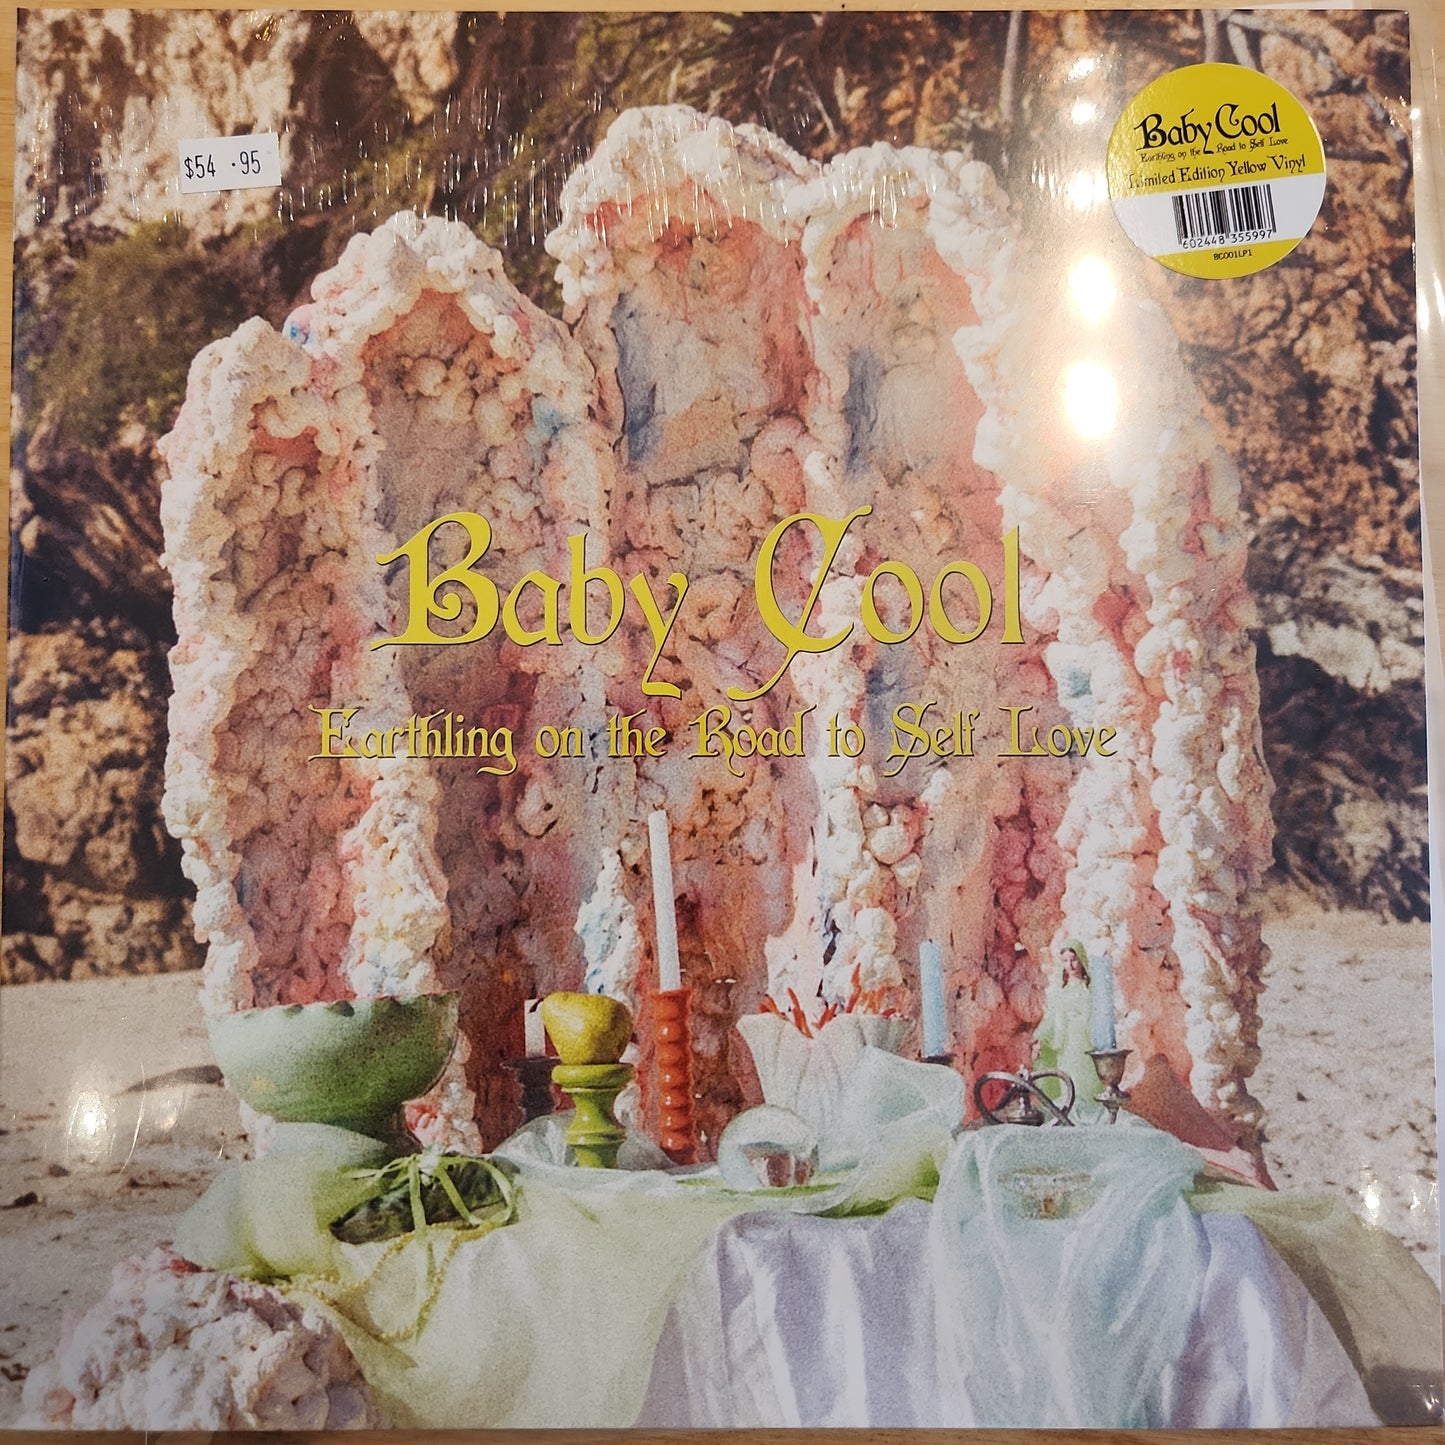 Baby Cool - Earthling on the Road to Self Love - Limited Yellow Vinyl